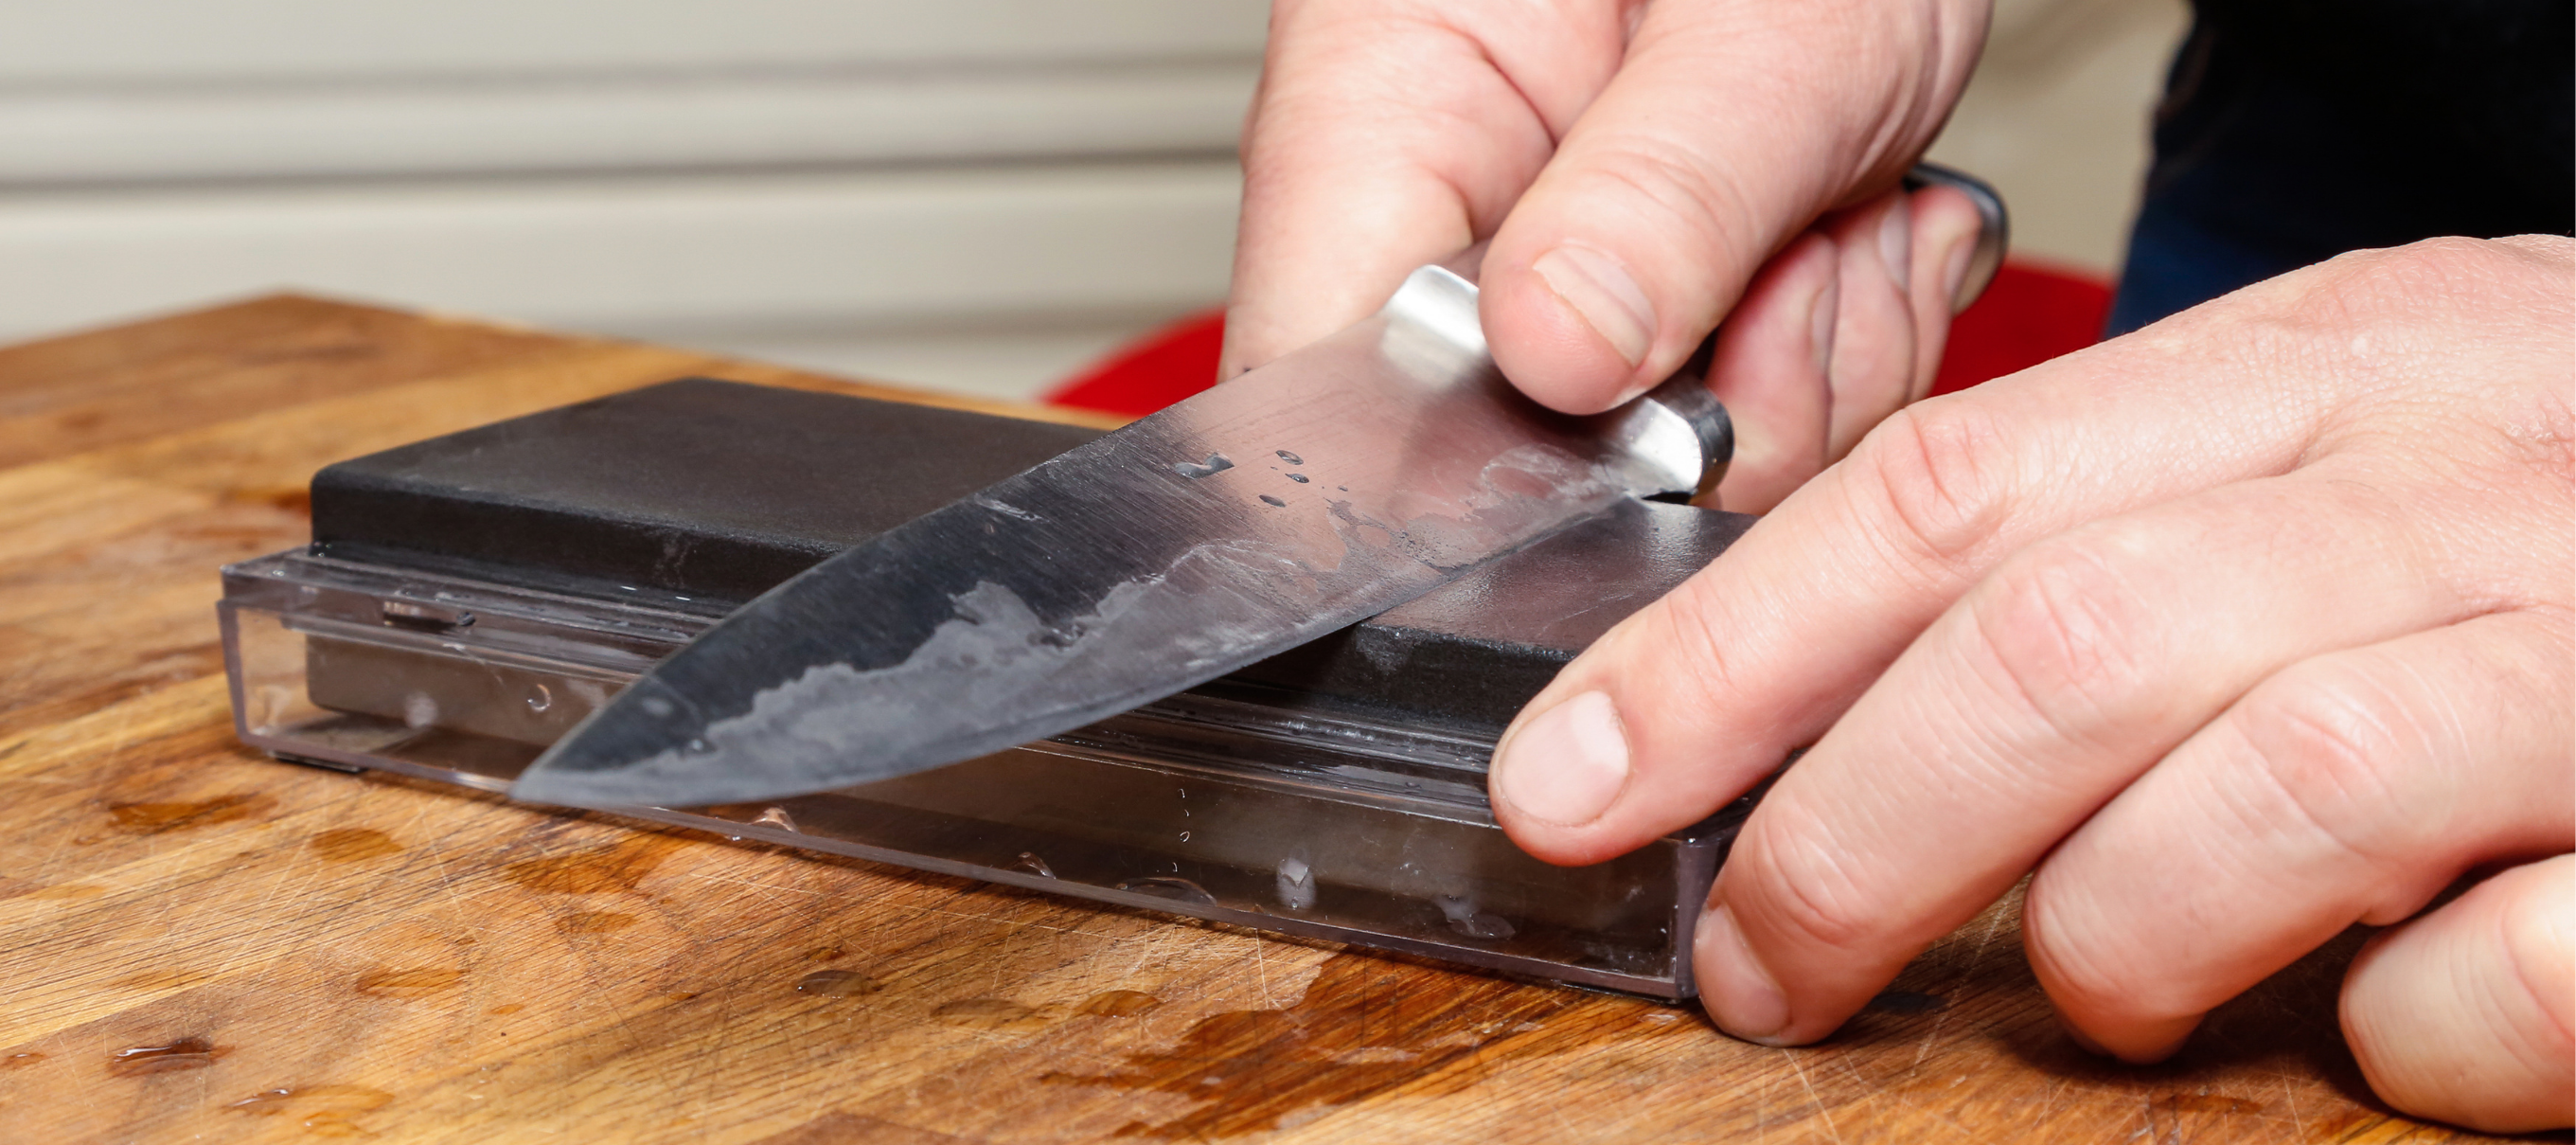 How to Sharpen a Knife Using a Whetstone